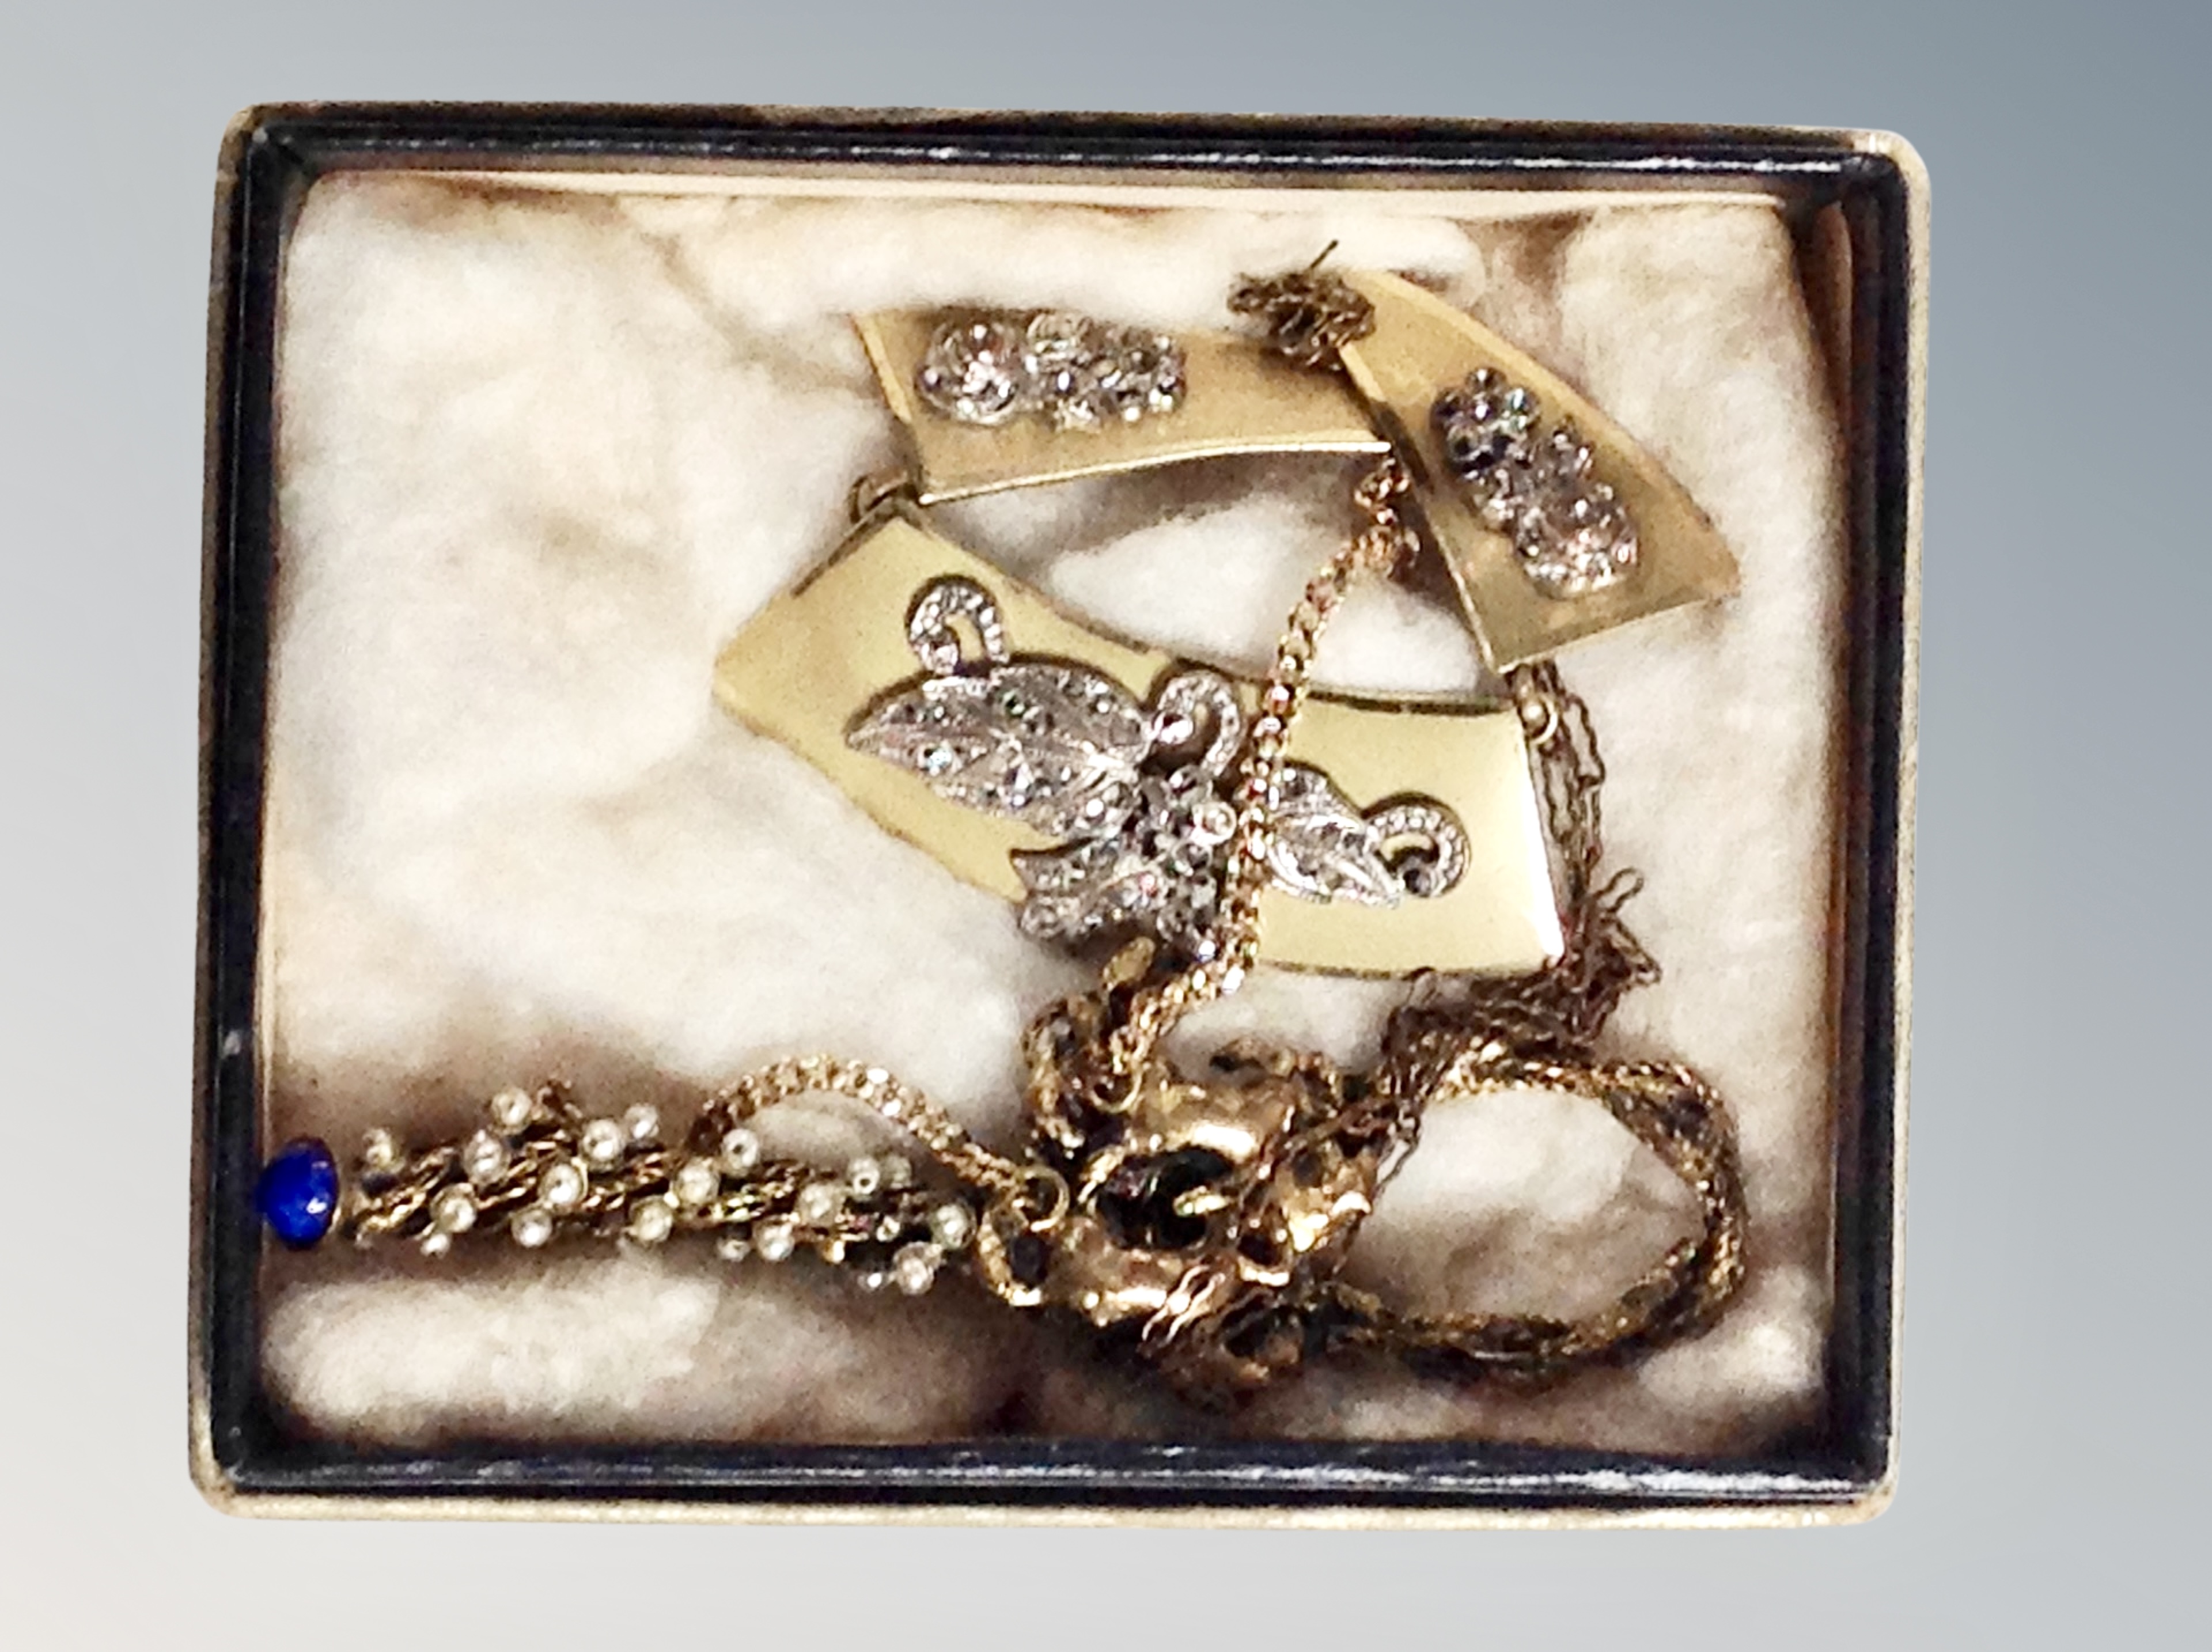 A vintage Marcasite collar necklace and faux pearl brooch decorated with horses